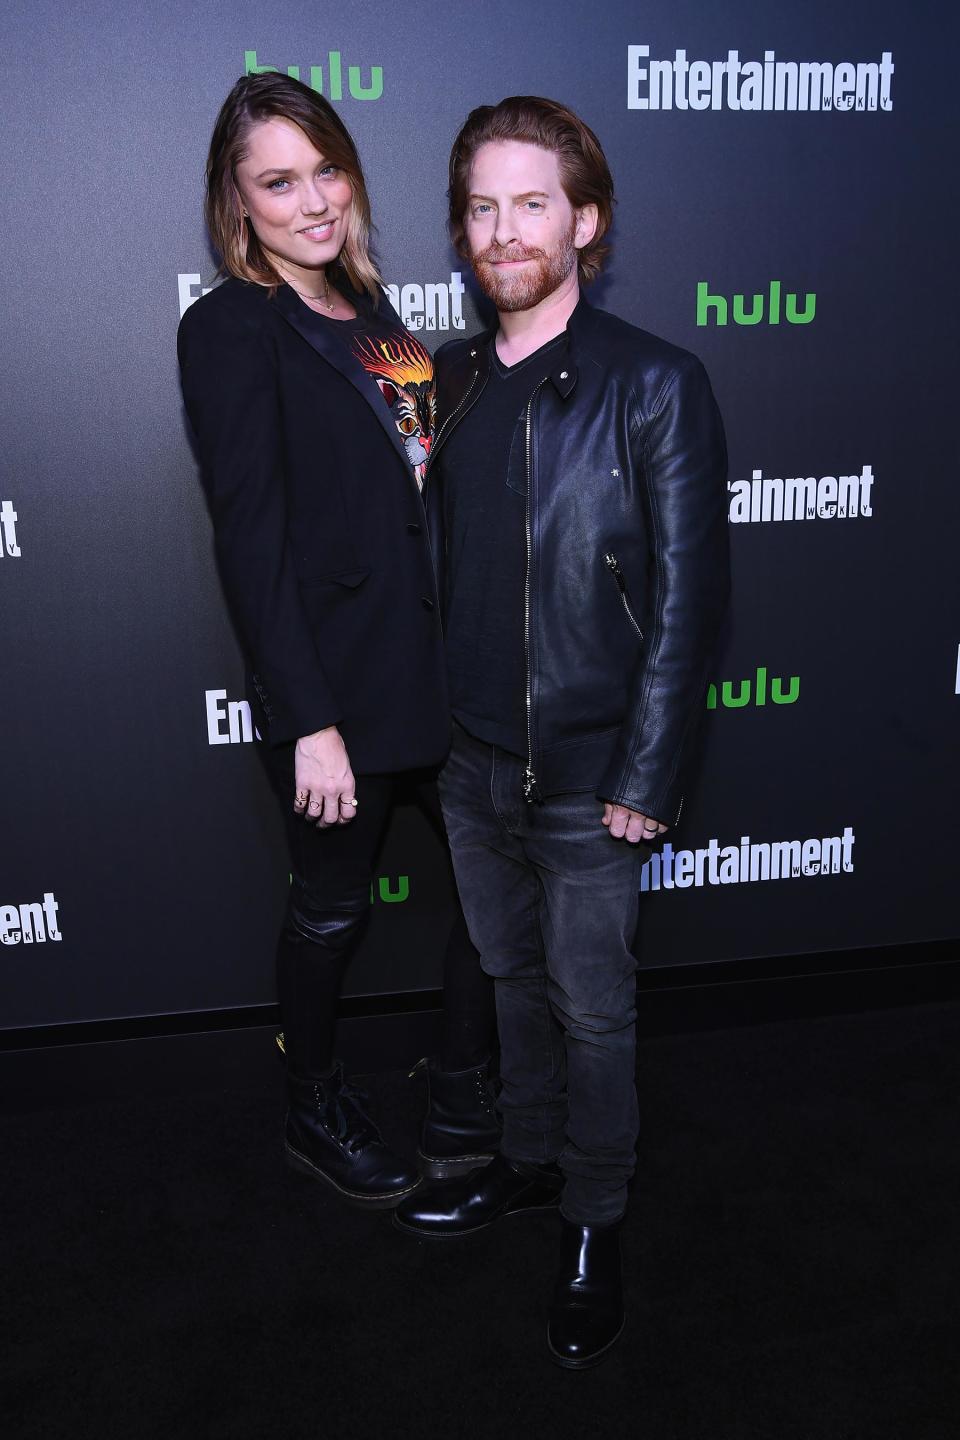 Clare Grant and Seth Green